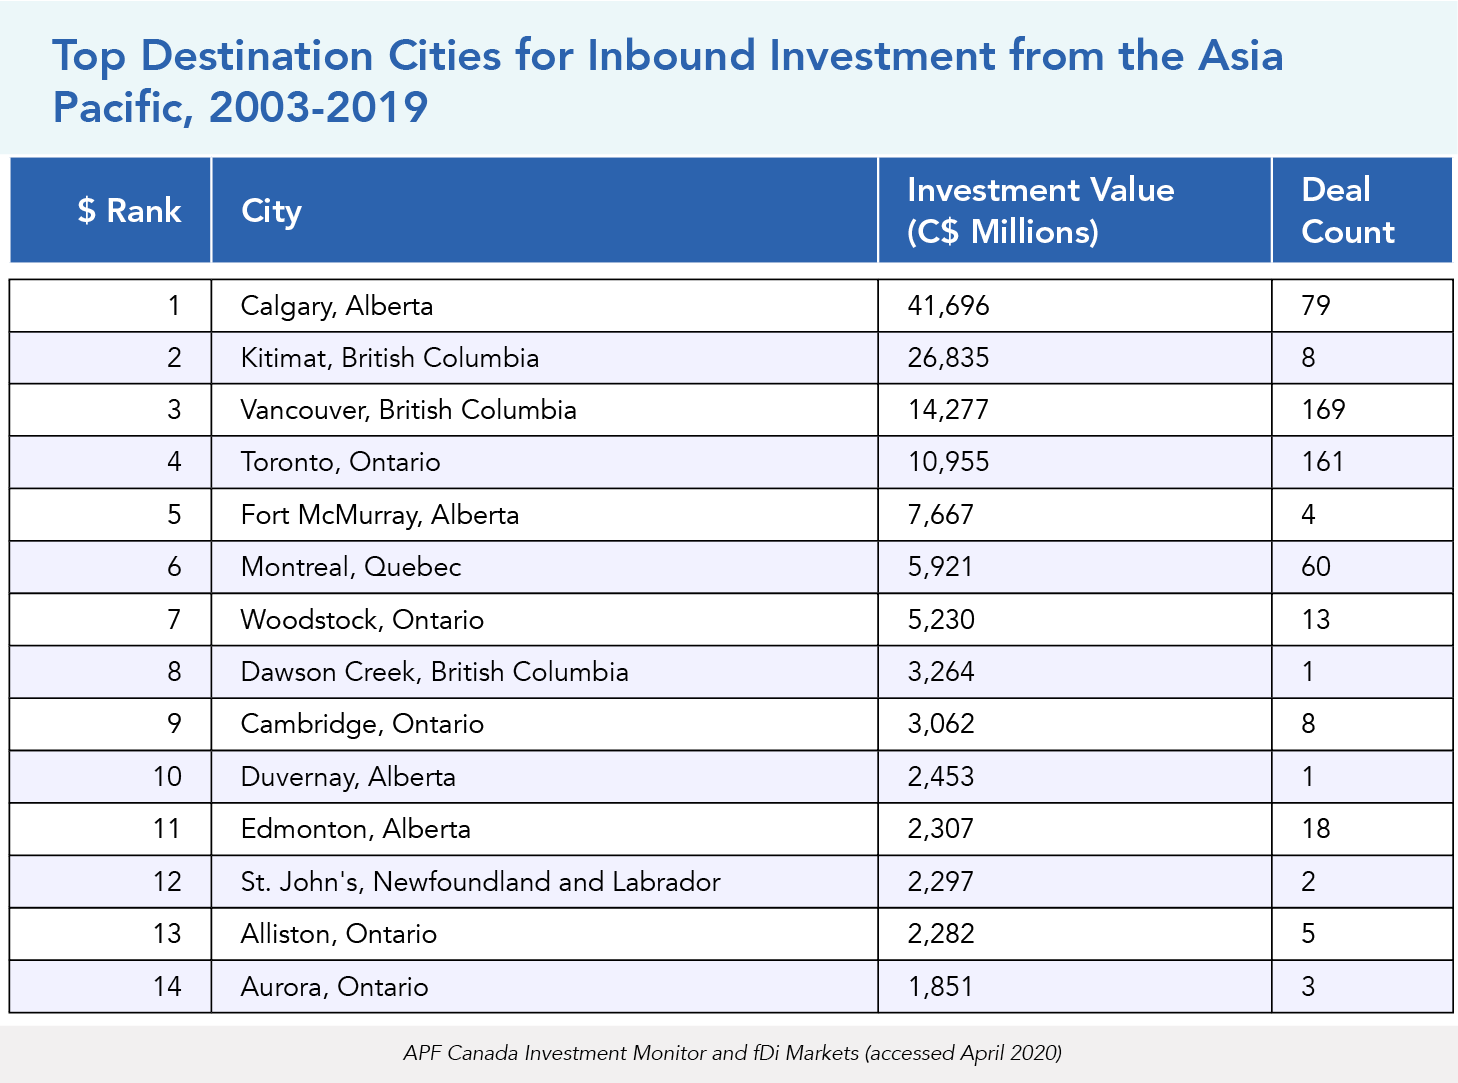 Top Destination Cities for Inbound Investment from the Asia Pacific, 2003-2019